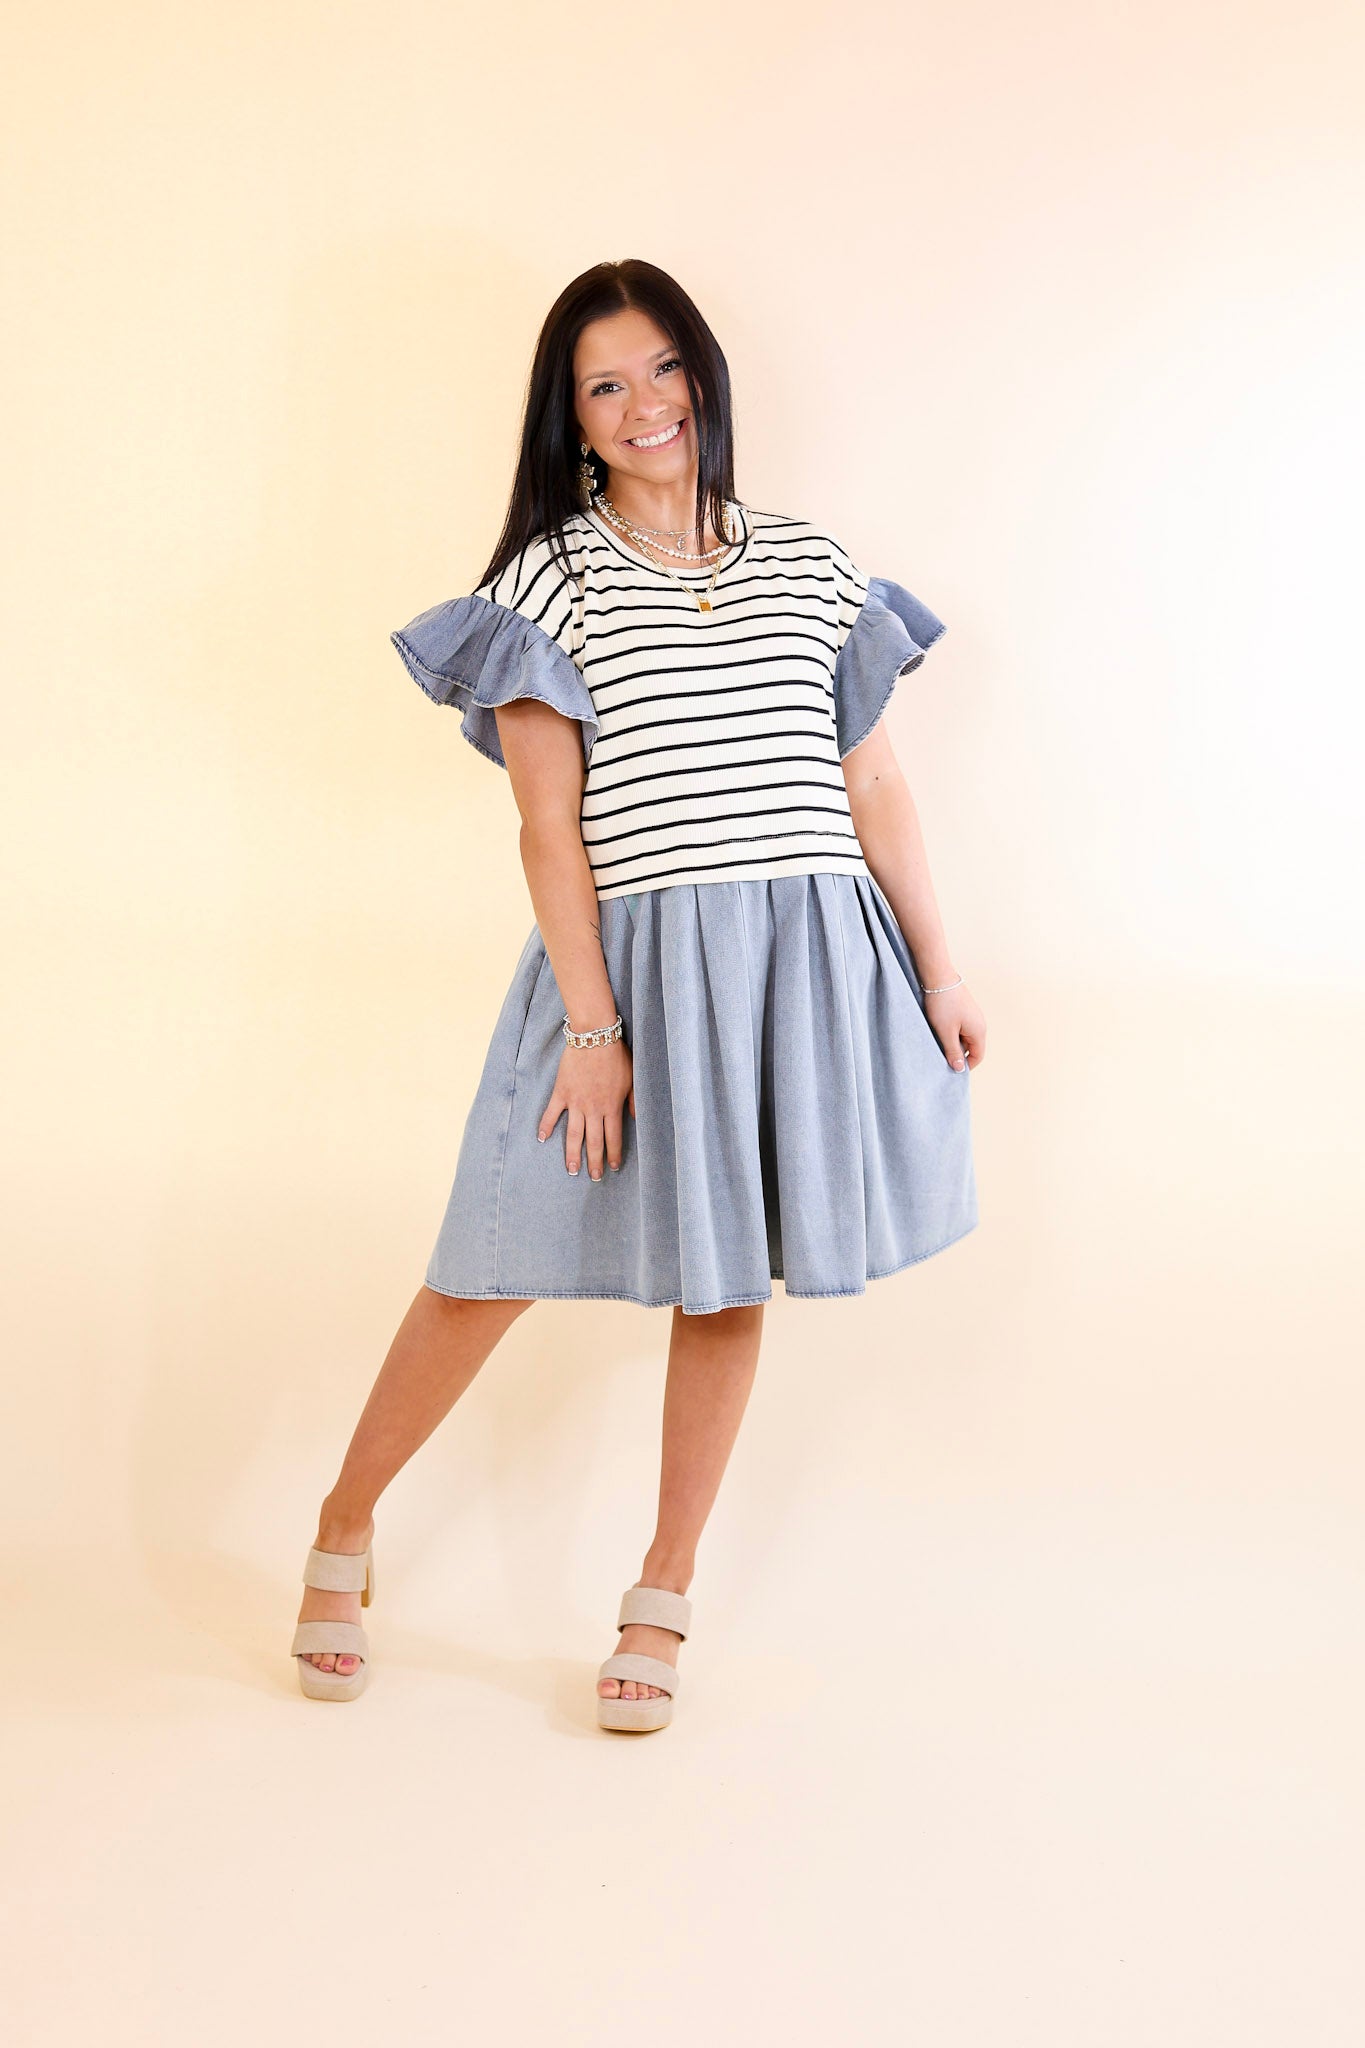 Denim Duo Striped Dress in Cream and Black with Denim - Giddy Up Glamour Boutique